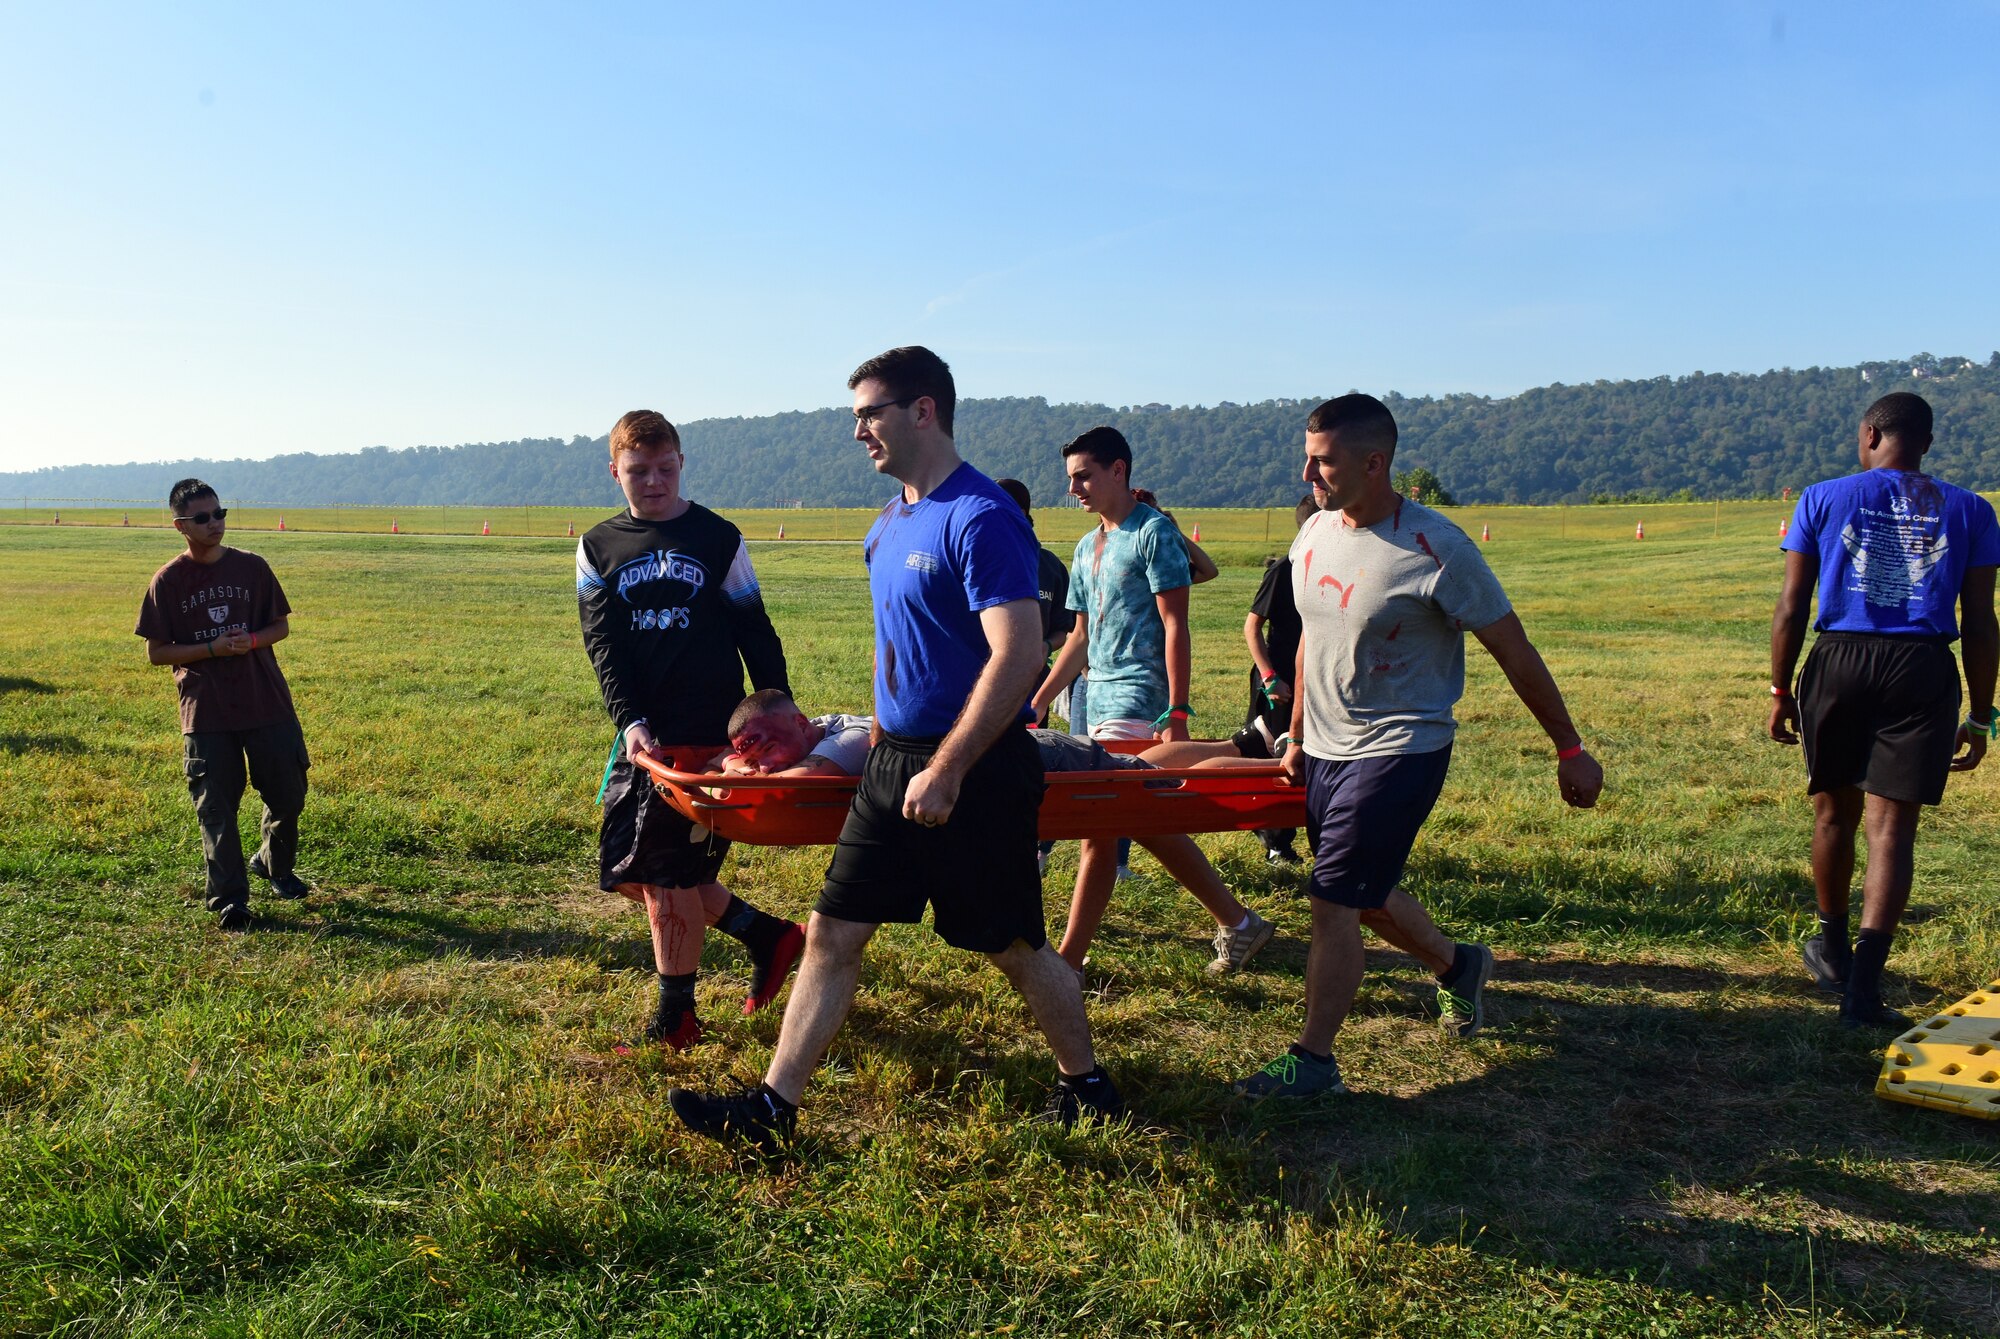 Members of the 193rd Special Operations Wing student flight and local volunteers help to transport the wounded to safety during a simulated aircraft crash exercise held September 21, 2019, at Harrisburg International Airport, in Middletown, Pennsylvania.